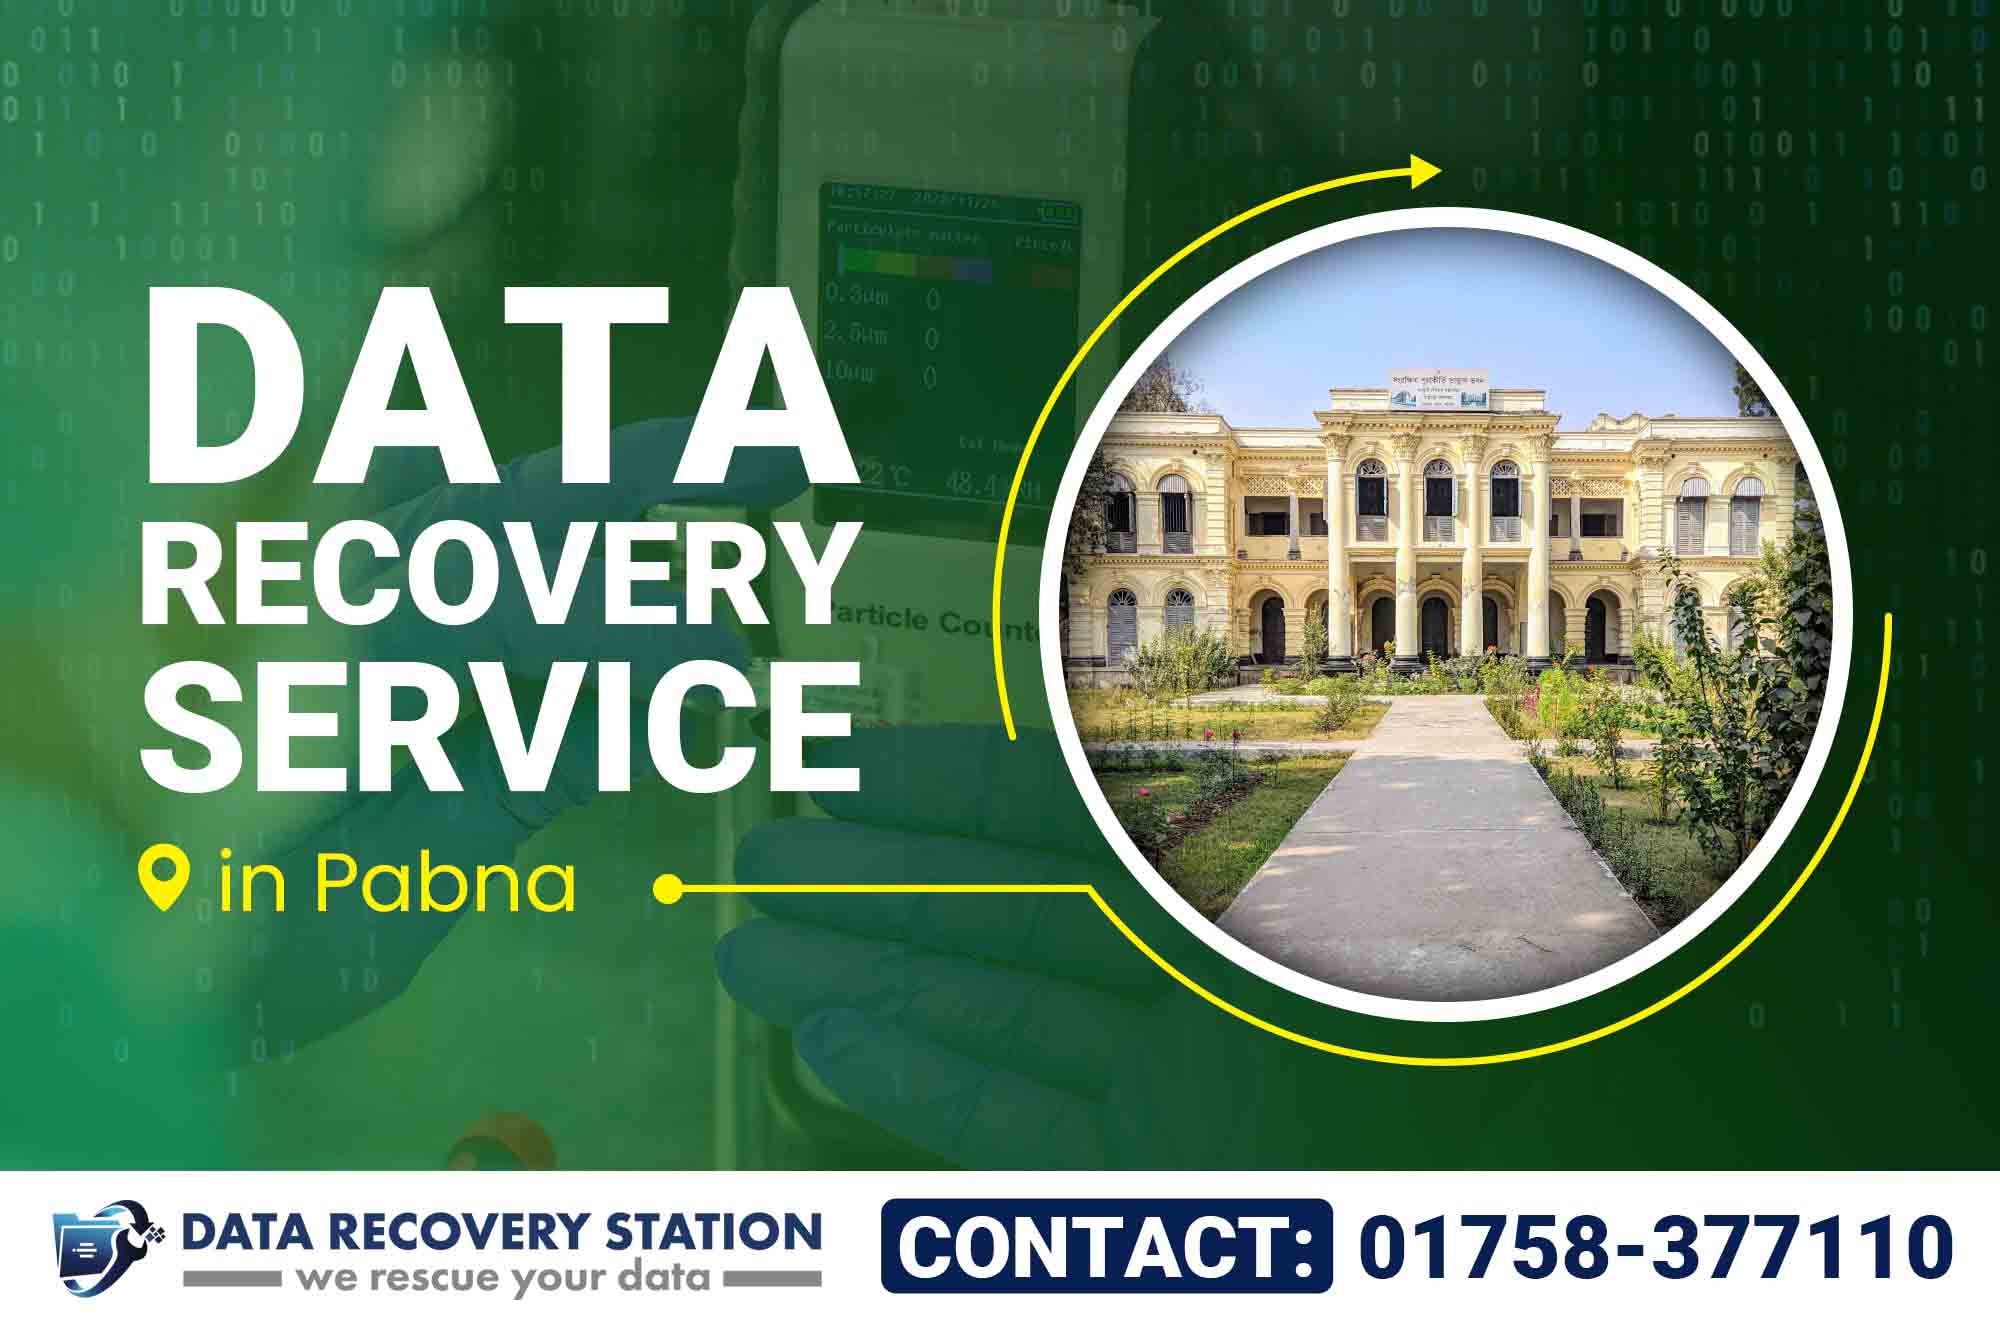 Data Recovery Service in Pabna